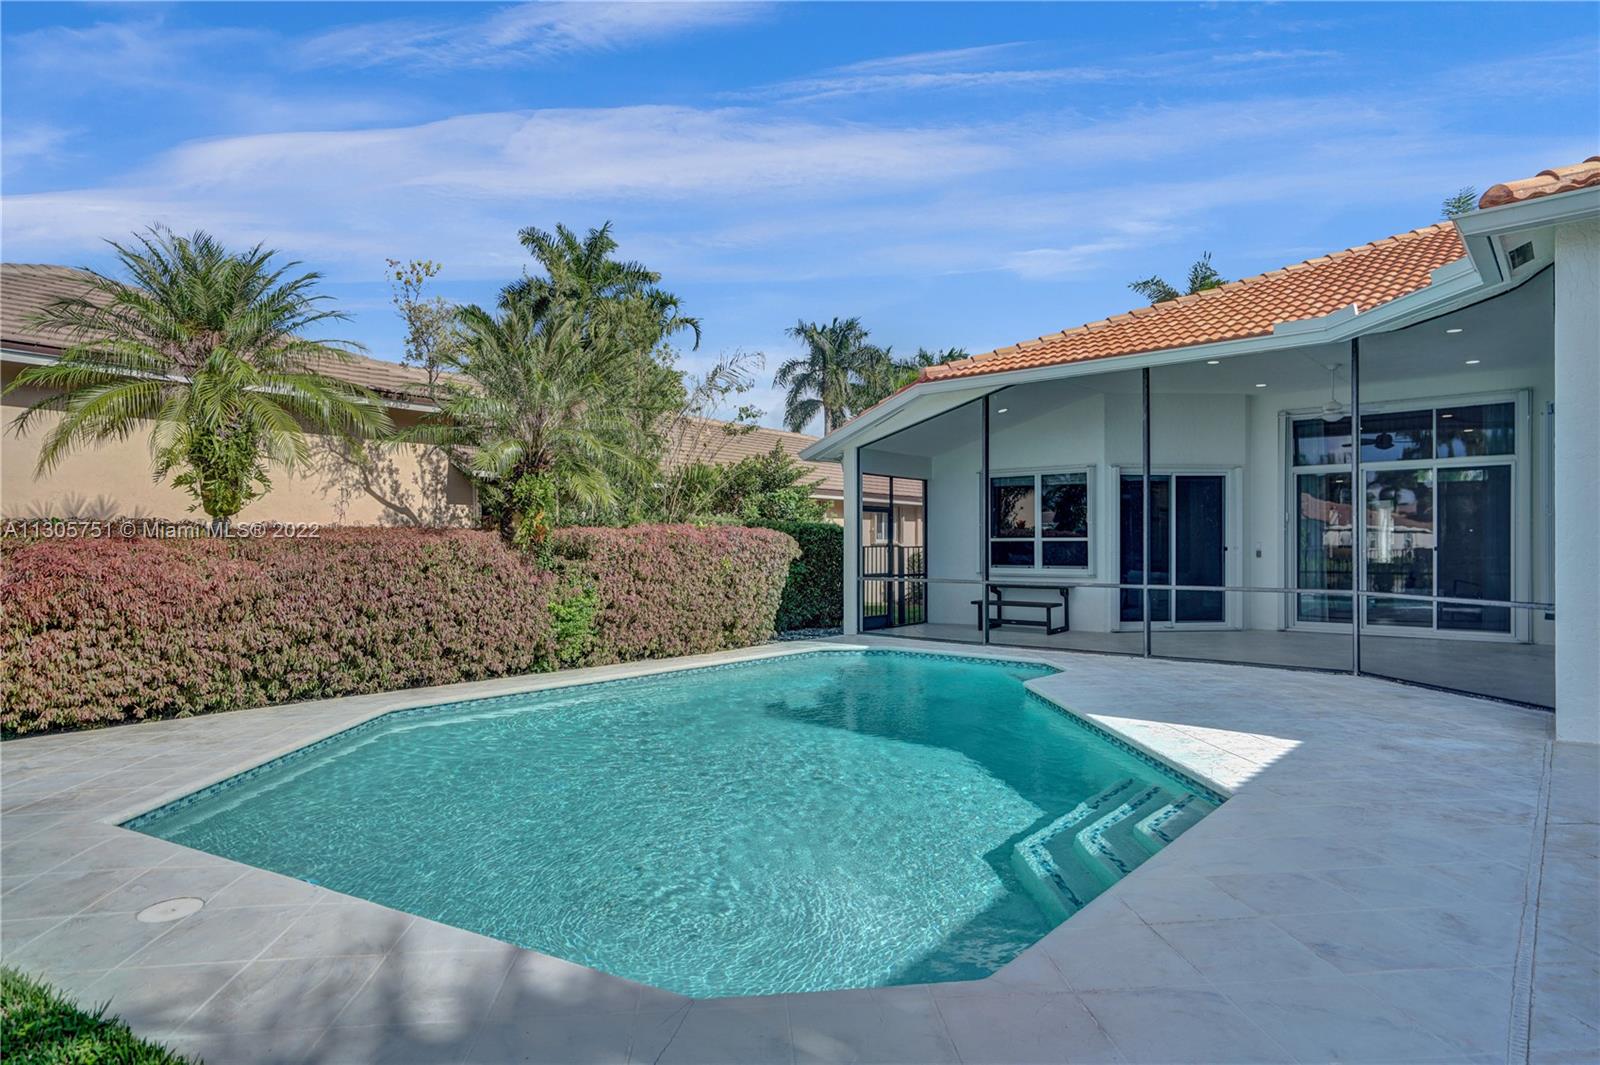 Love that the pool is within the fenced yard and you still have a screened area of the patio.